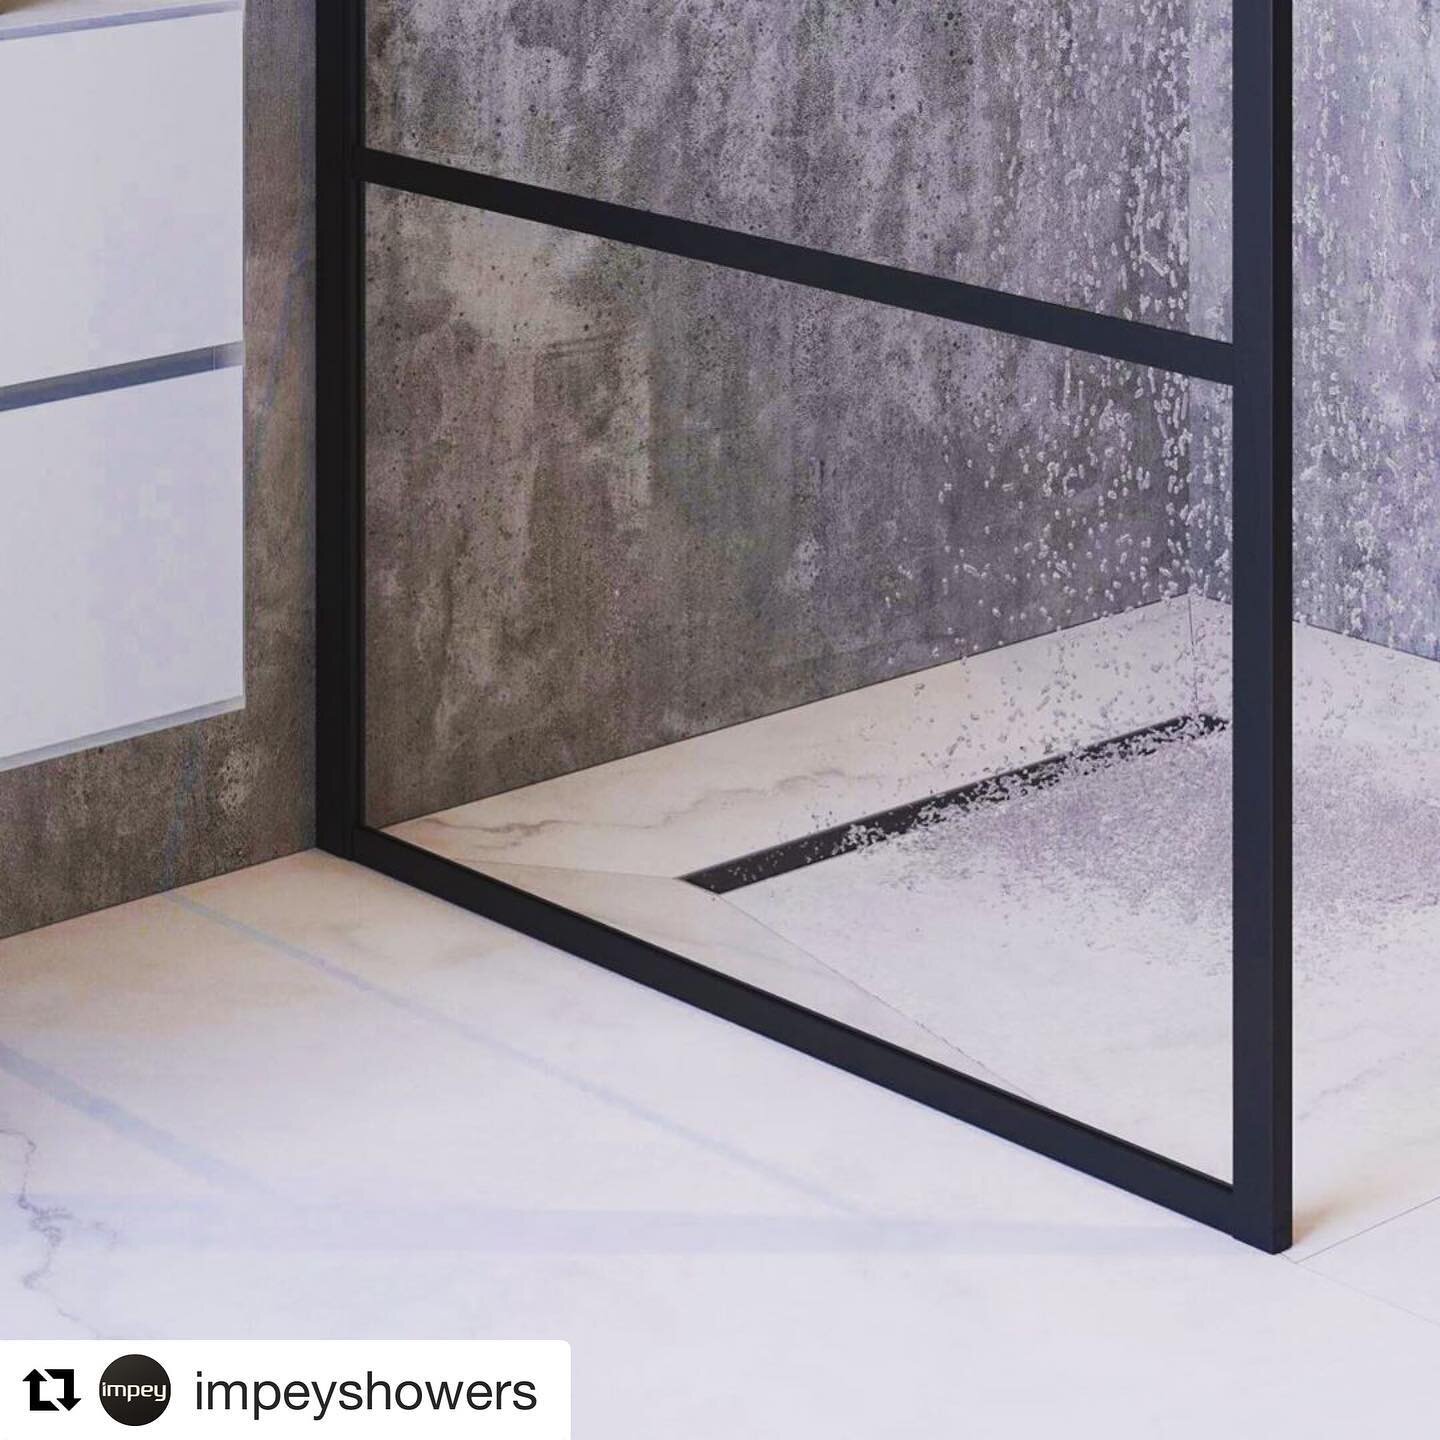 #Repost @impeyshowers with @get_repost
・・・
Here @henryroseinteriors we only work with the best......
The wetroom of the future.  Proud to have lead the wetroom market for 20+ years.

#KBB20
#ImpeyWetrooms
#showering
#wetrooms
#bathroomdesign #impeywe